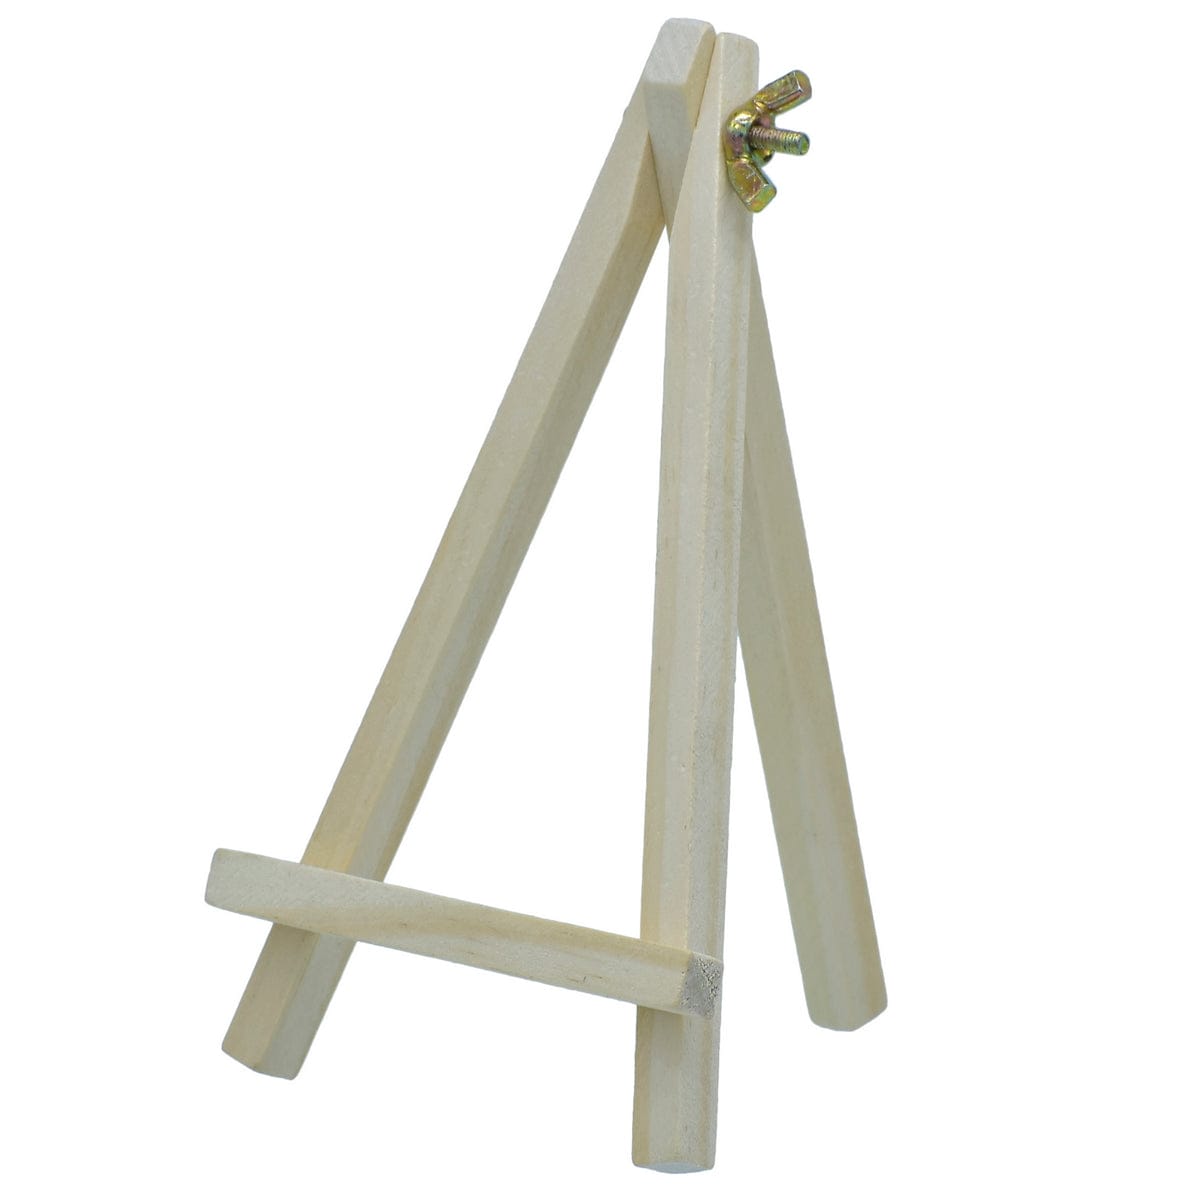 jags-mumbai Easel Wooden Easel 6 Inch Small